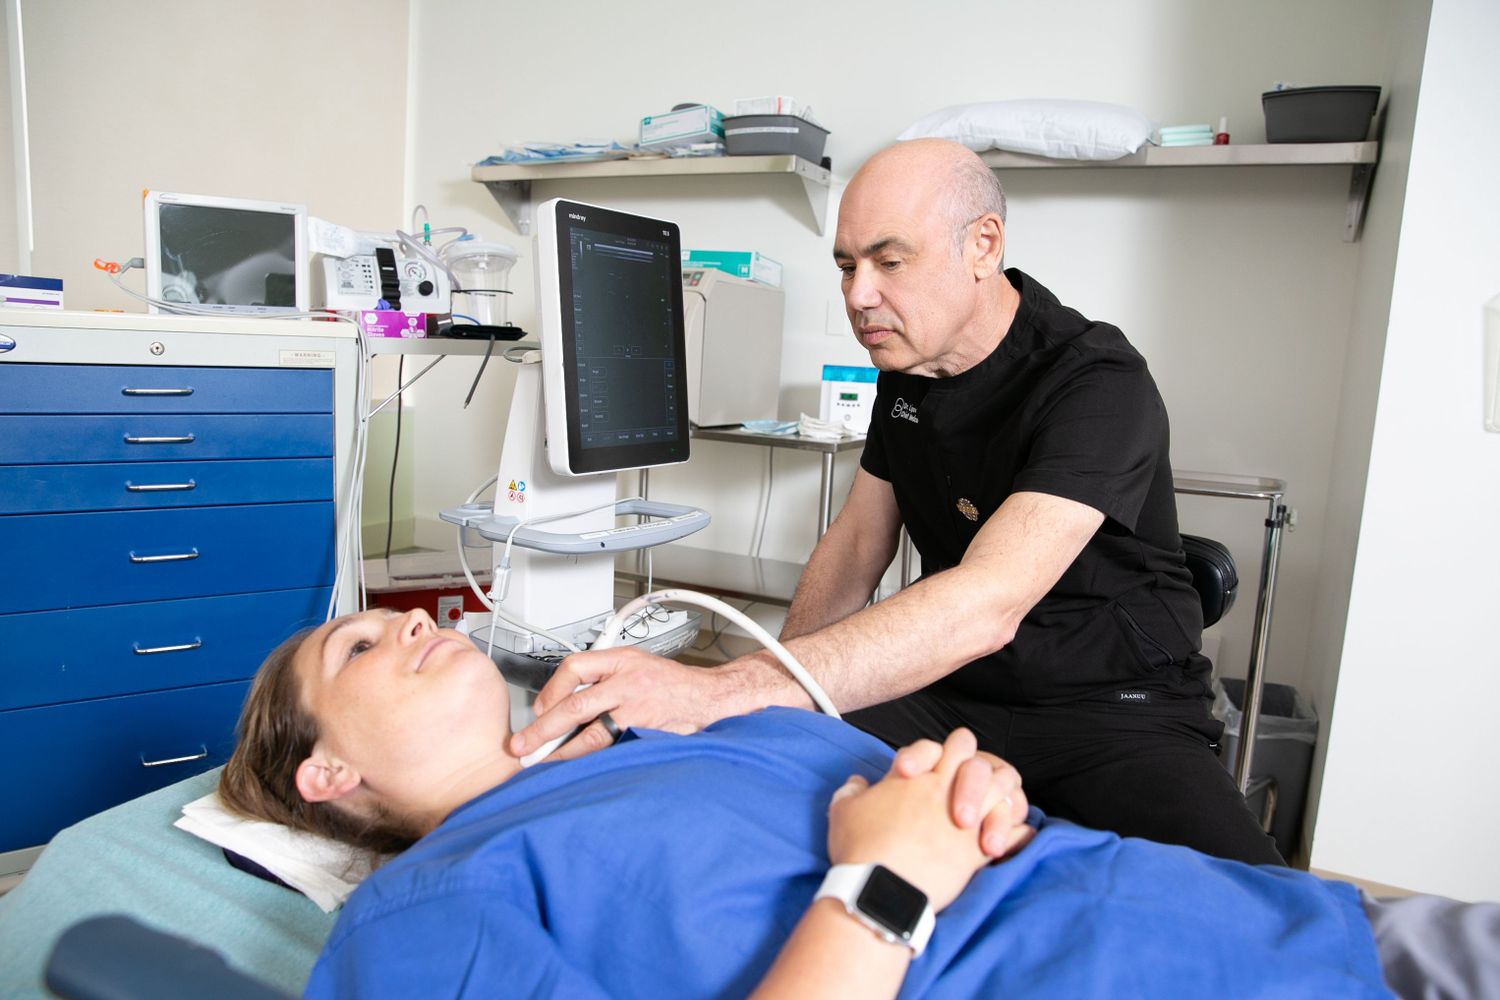 Dr. Lipov examines a patient 's neck with an ultrasound